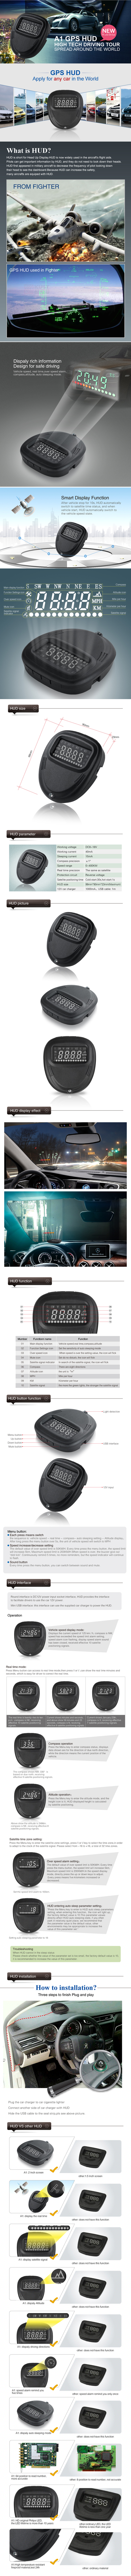 A1-2inch-GPS-Head-Up-Display-Vehicle-System-Speedometer-with-Overspeed-Alarm-981995